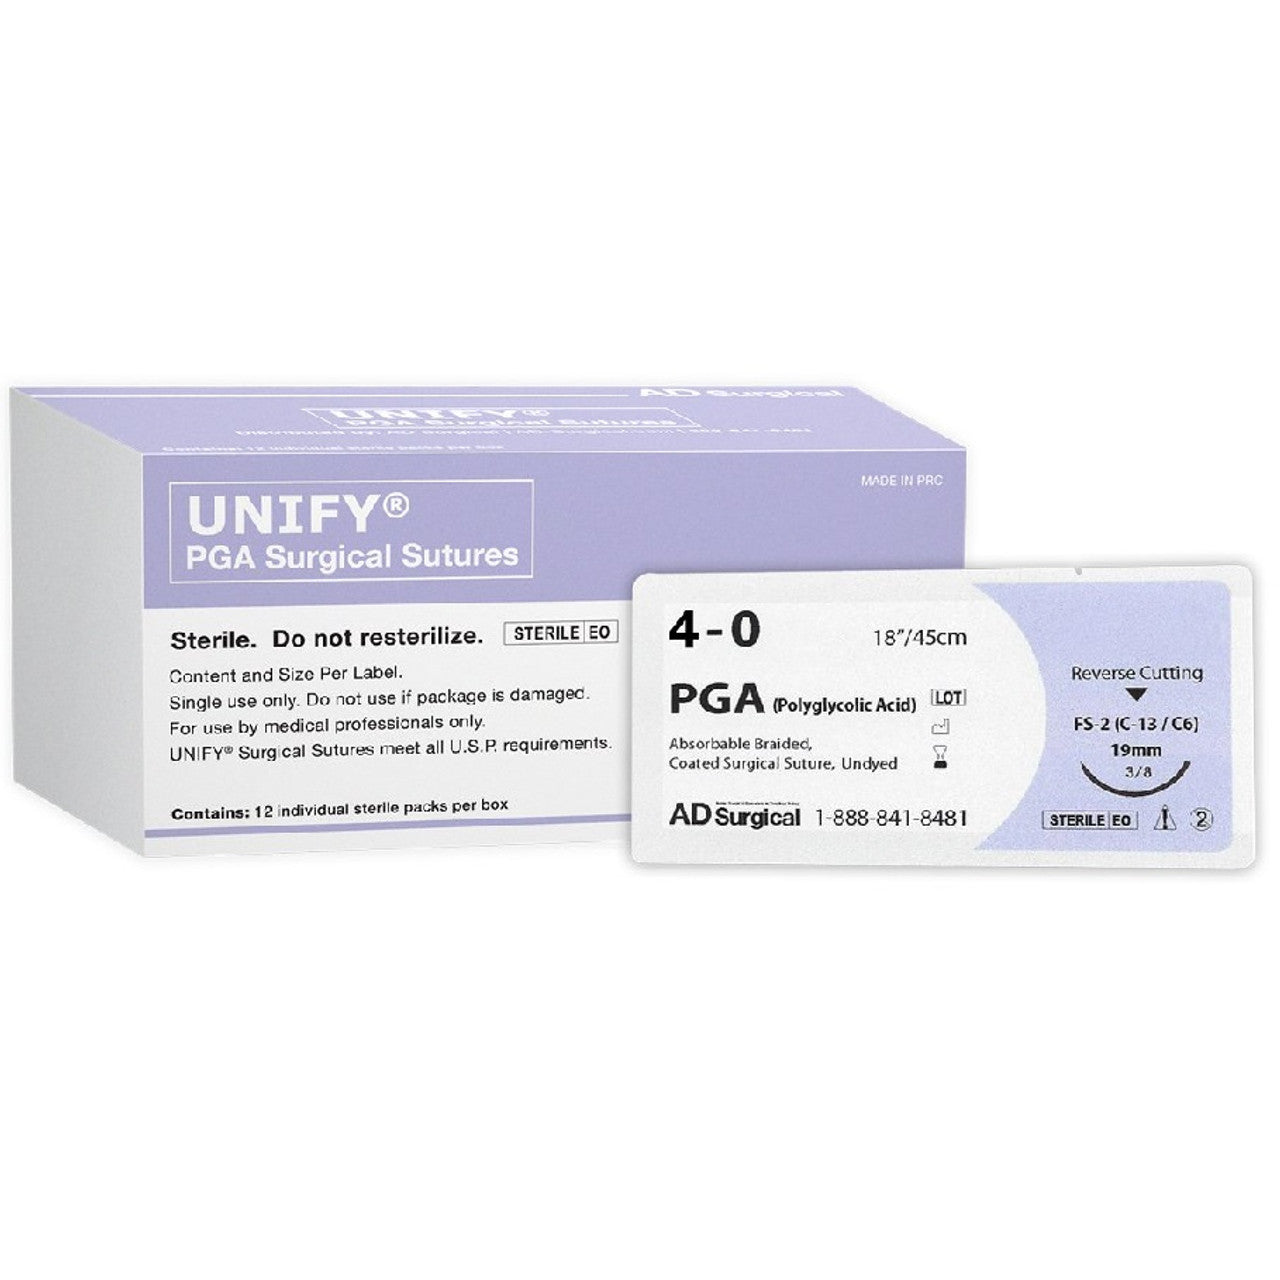 UNIFY SURGICAL SUTURES